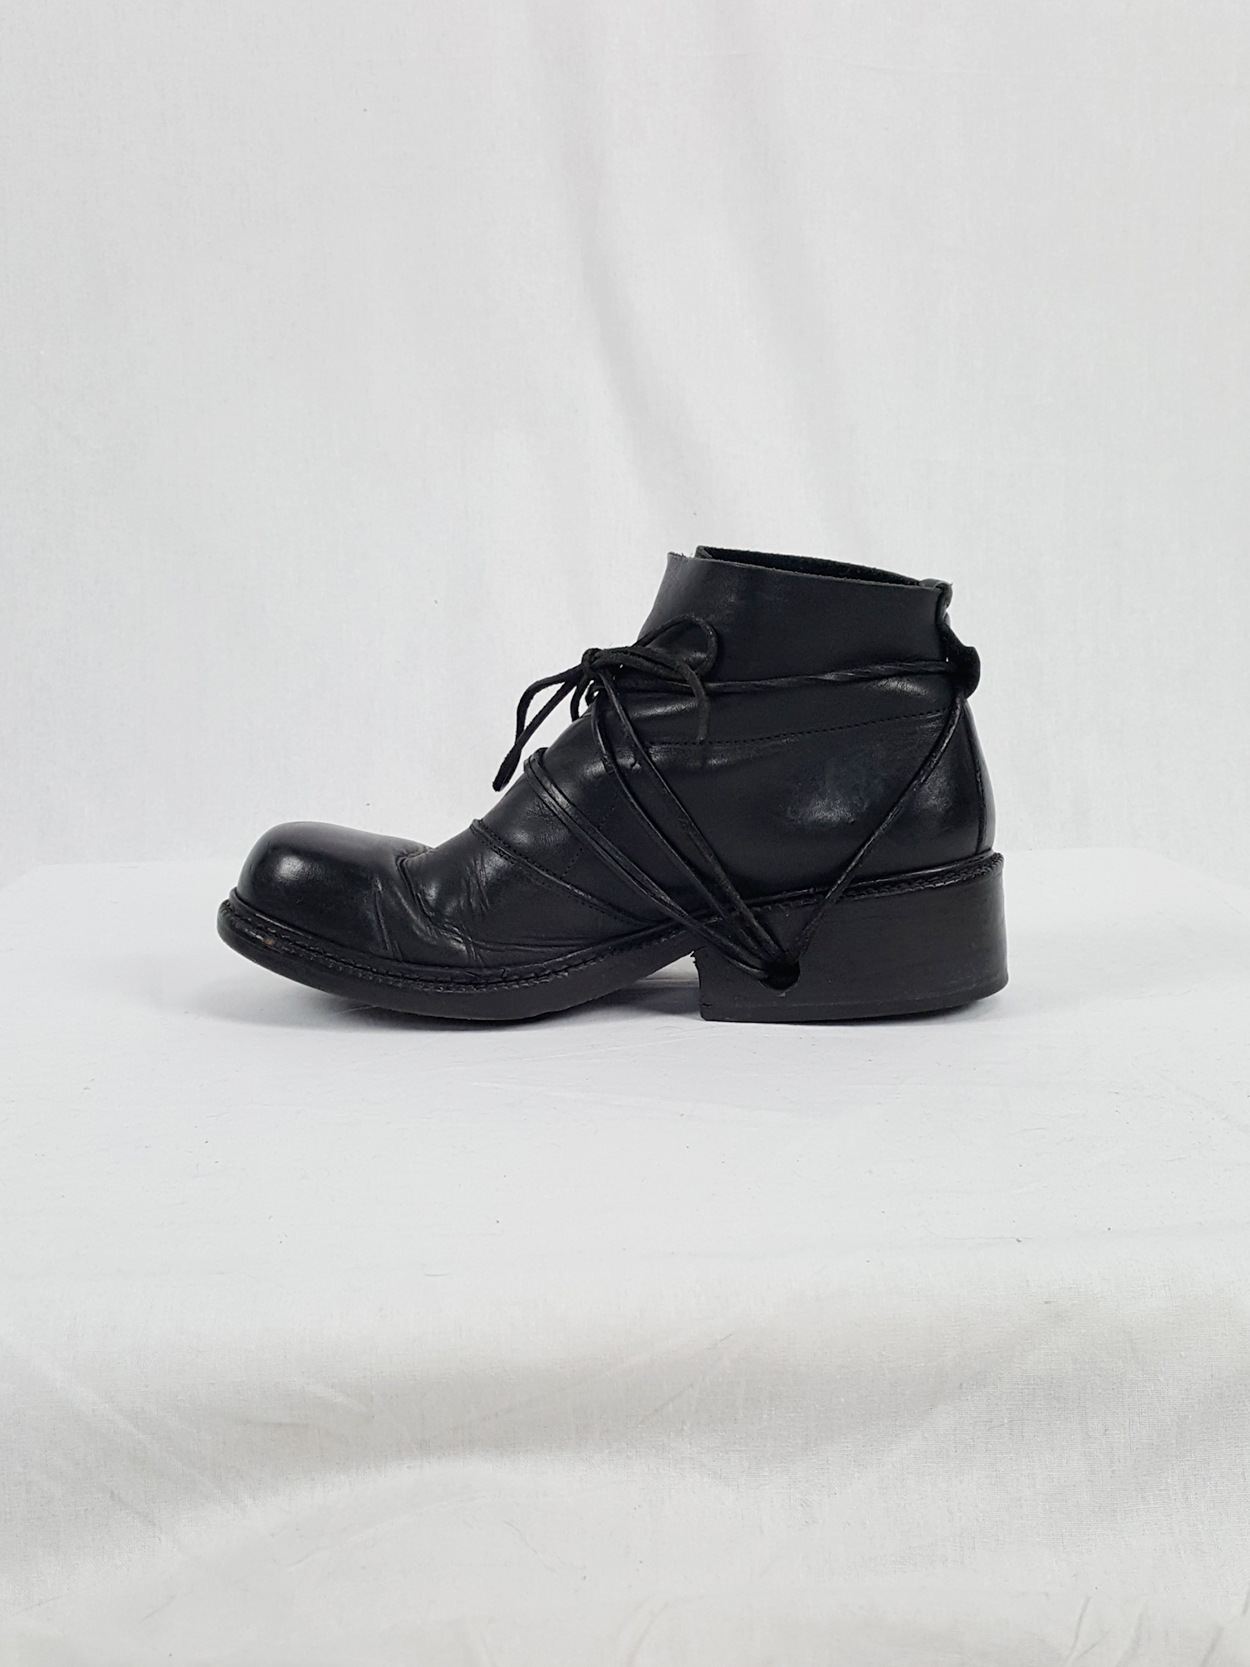 Dirk Bikkembergs black boots with laces through the soles (41 